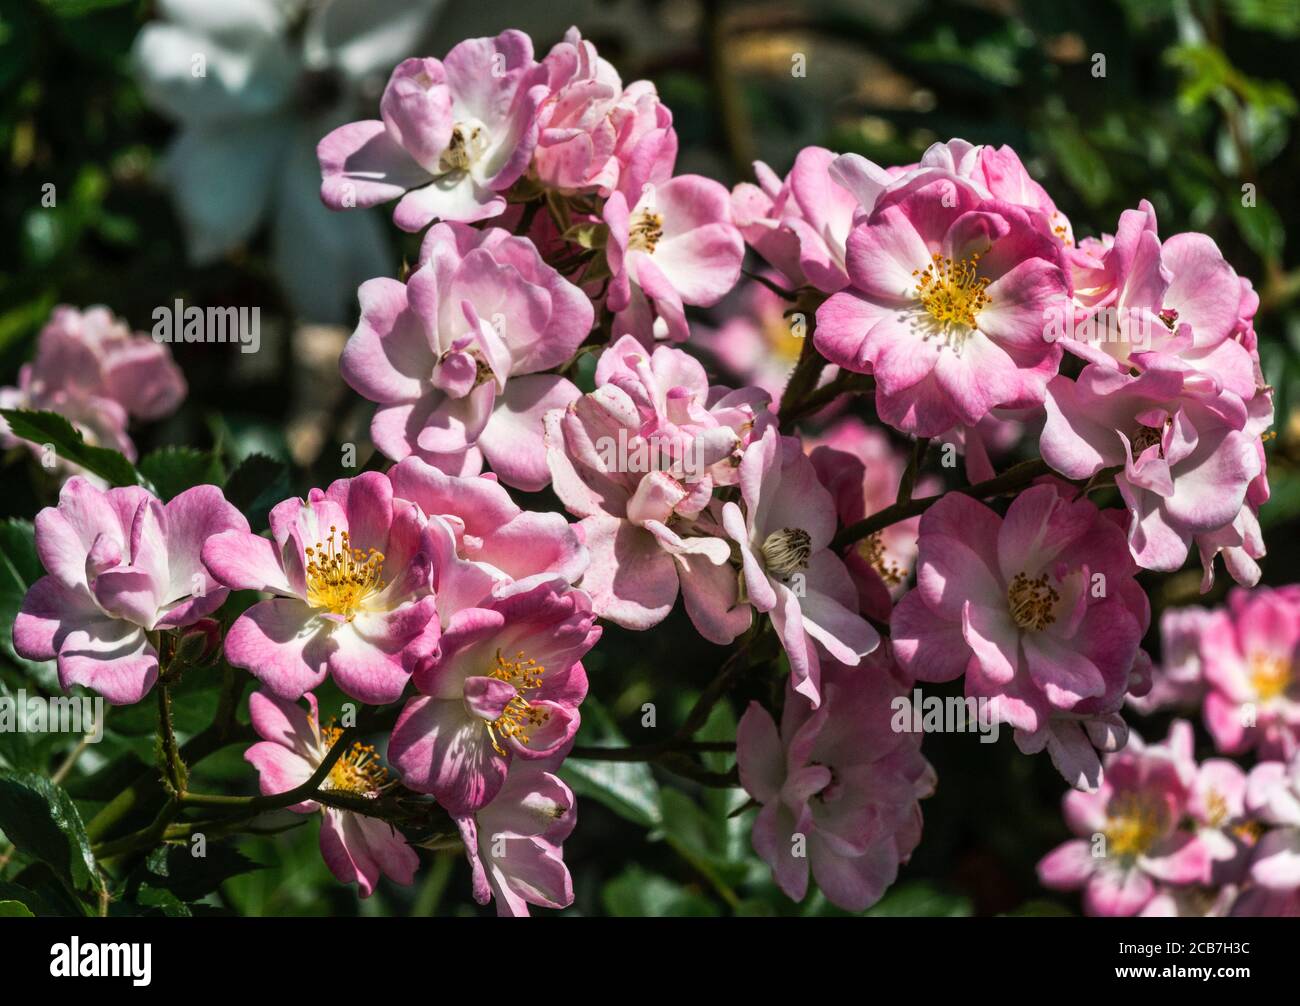 Stop And Smell The Roses High Resolution Stock Photography and Images -  Alamy